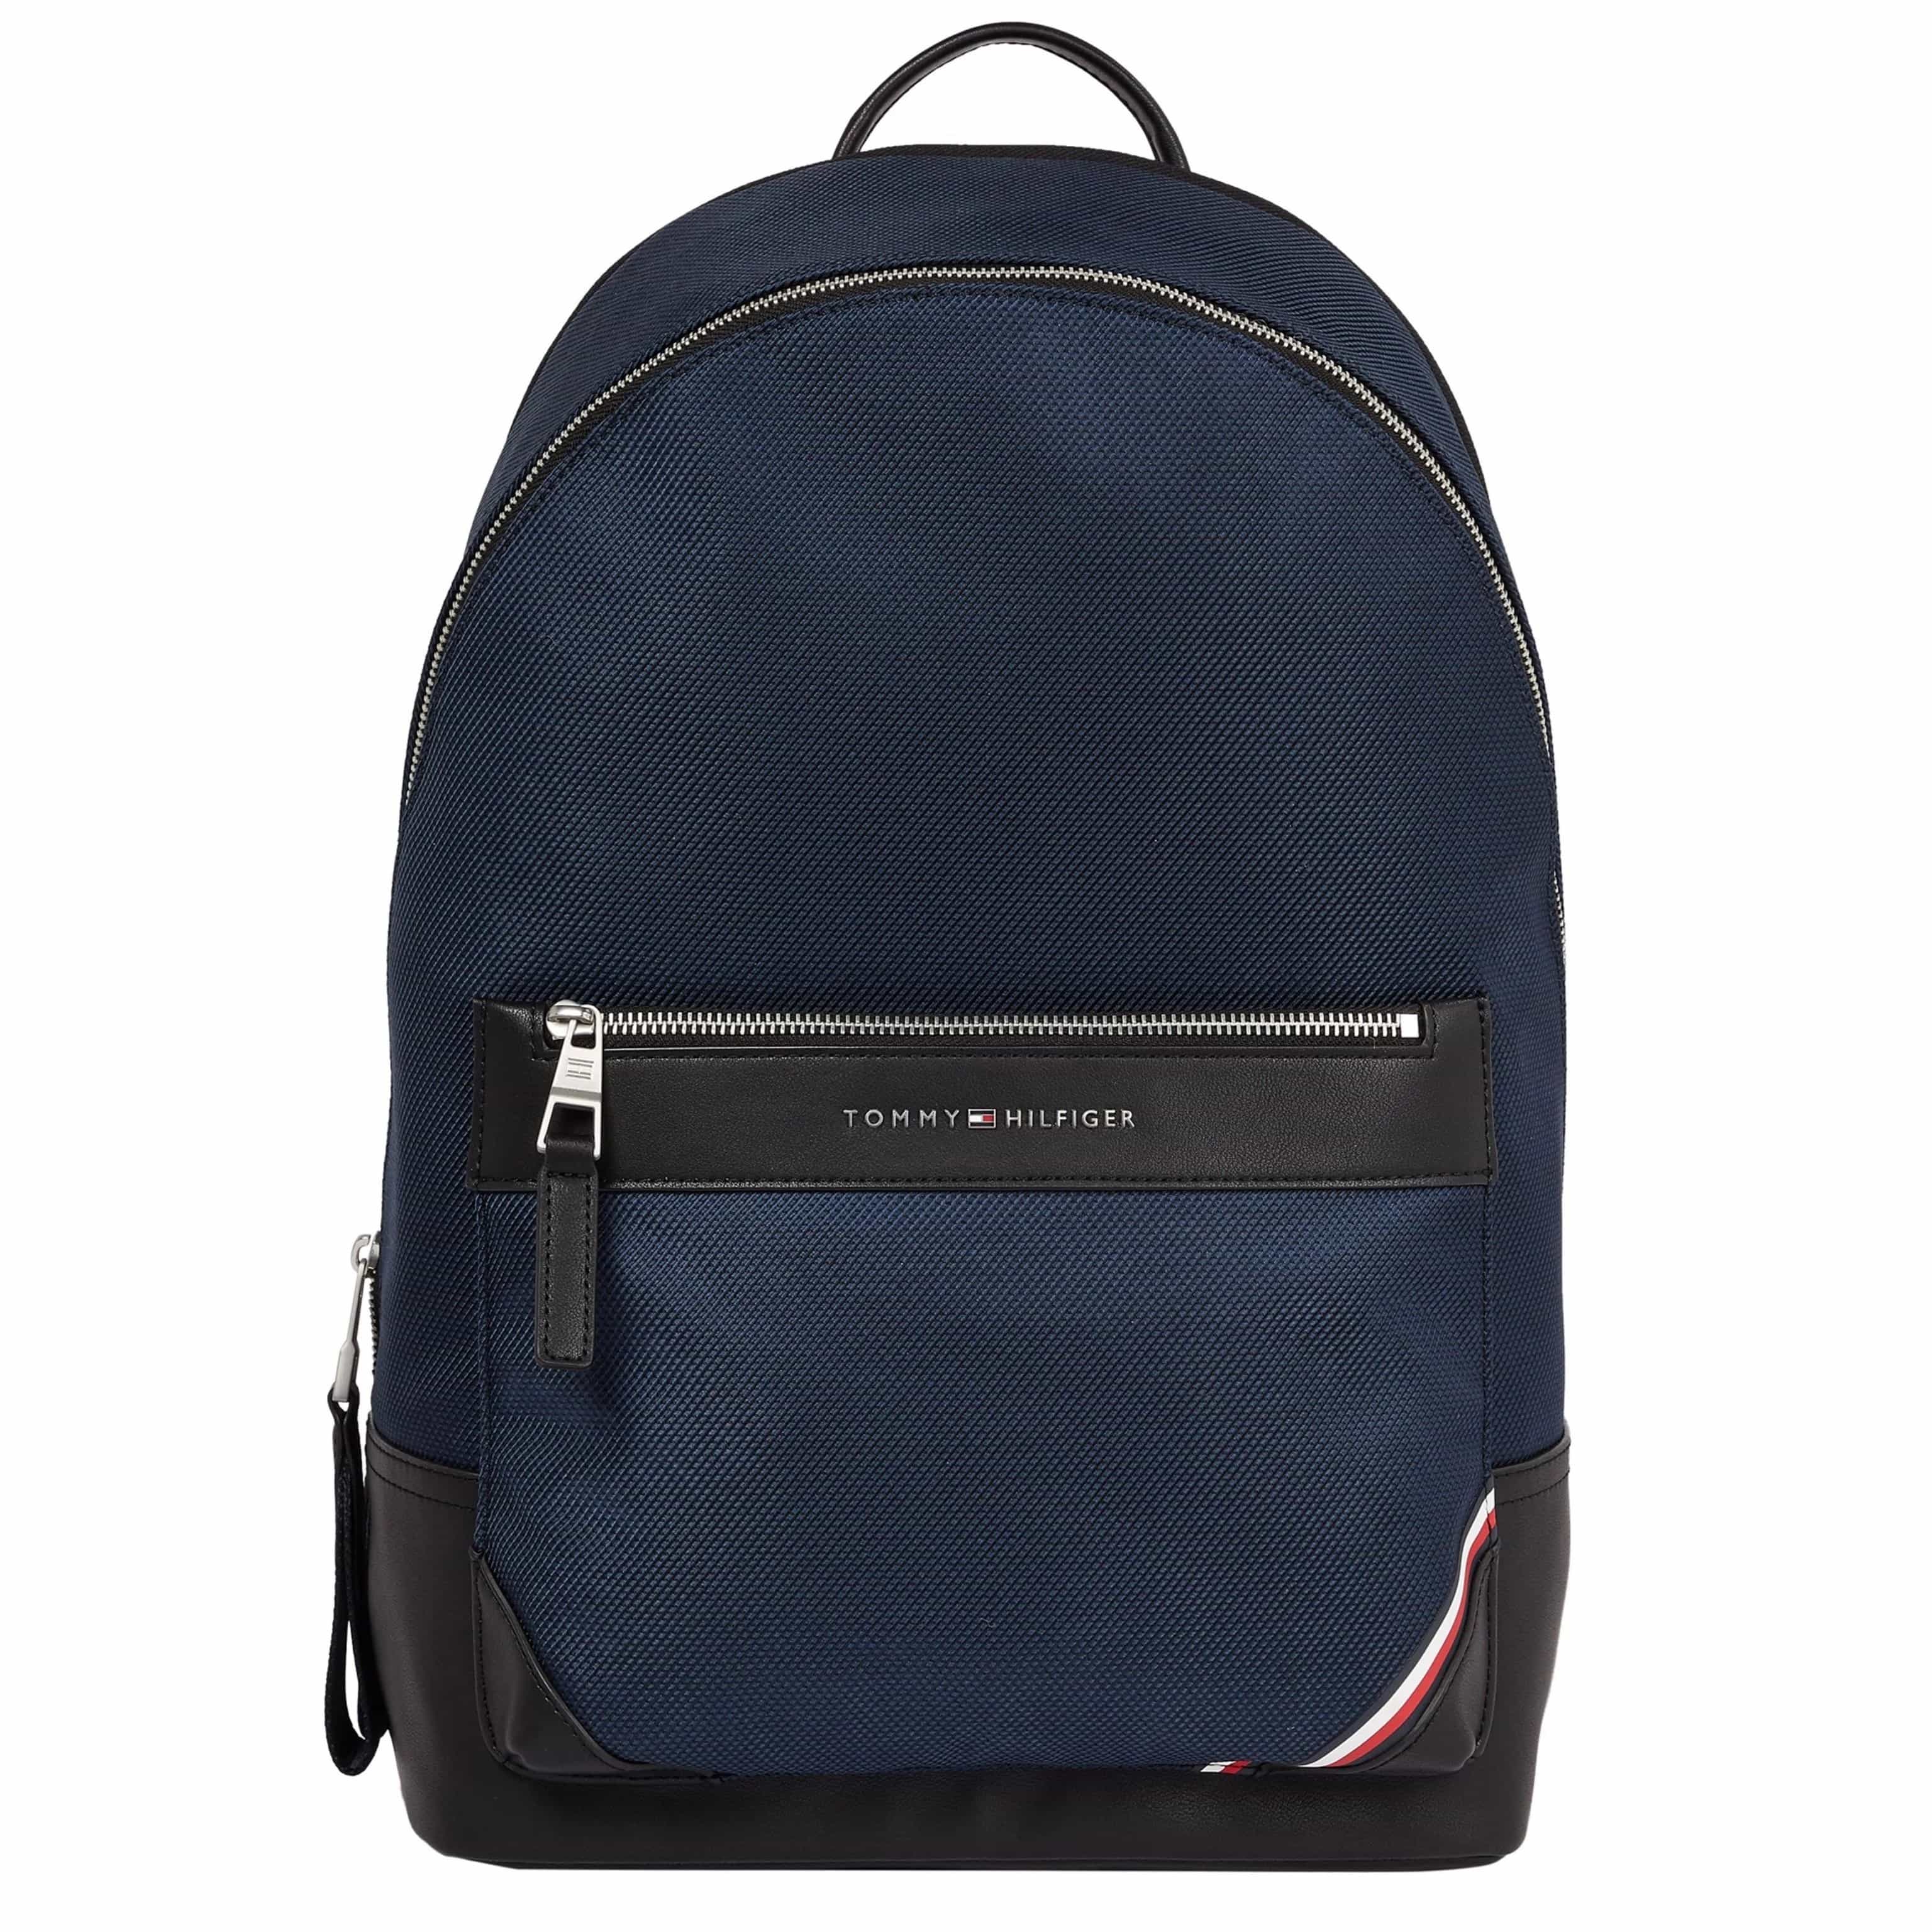 BALO TOMMY HILFIGER ESSENTIAL 1985 NYLON BACKPACK 5